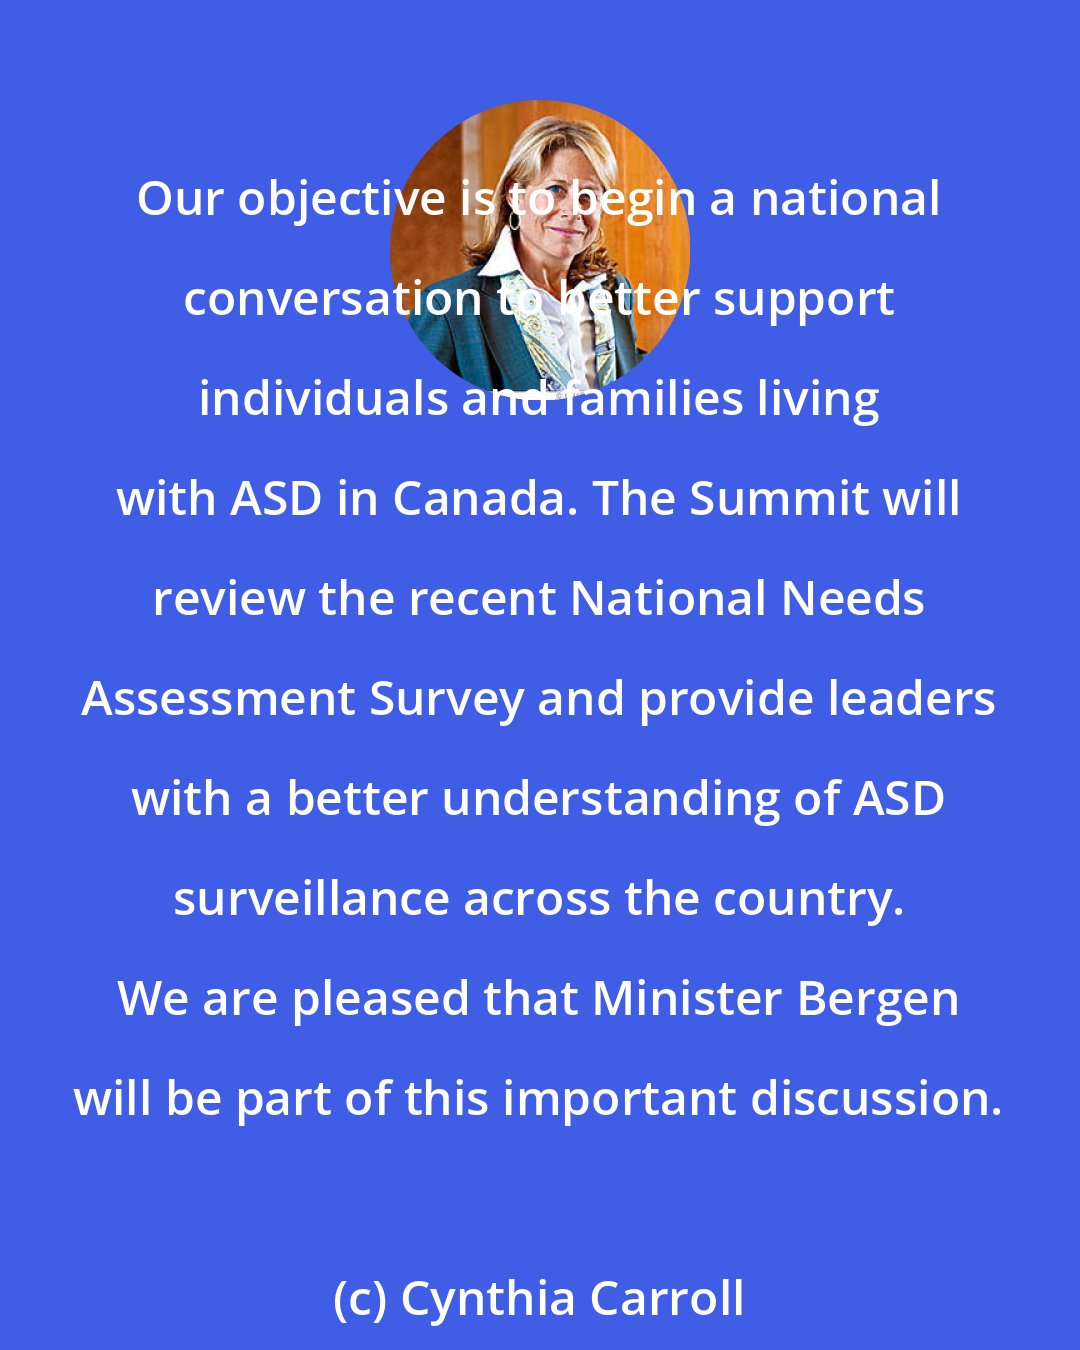 Cynthia Carroll: Our objective is to begin a national conversation to better support individuals and families living with ASD in Canada. The Summit will review the recent National Needs Assessment Survey and provide leaders with a better understanding of ASD surveillance across the country. We are pleased that Minister Bergen will be part of this important discussion.